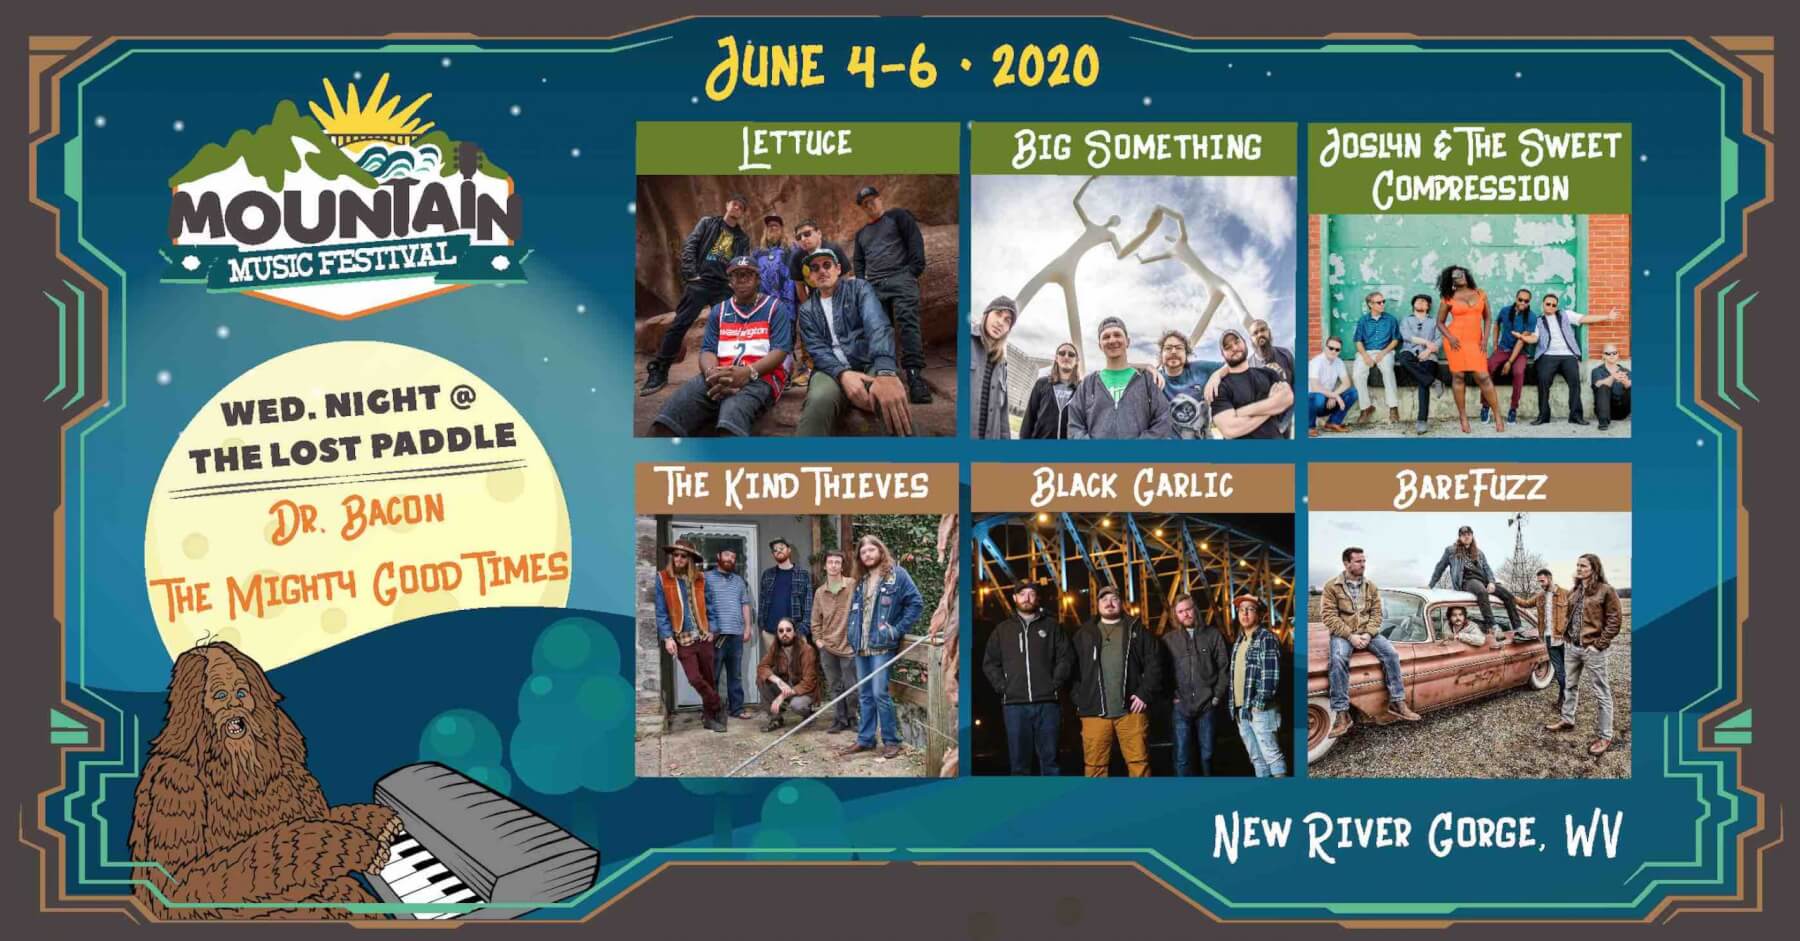 mountain music festival 2020 lineup announcement featuring lettuce big something Joslyn and the sweet compression the kind theives black garlic barefuzz dr bacon and the mighty good times